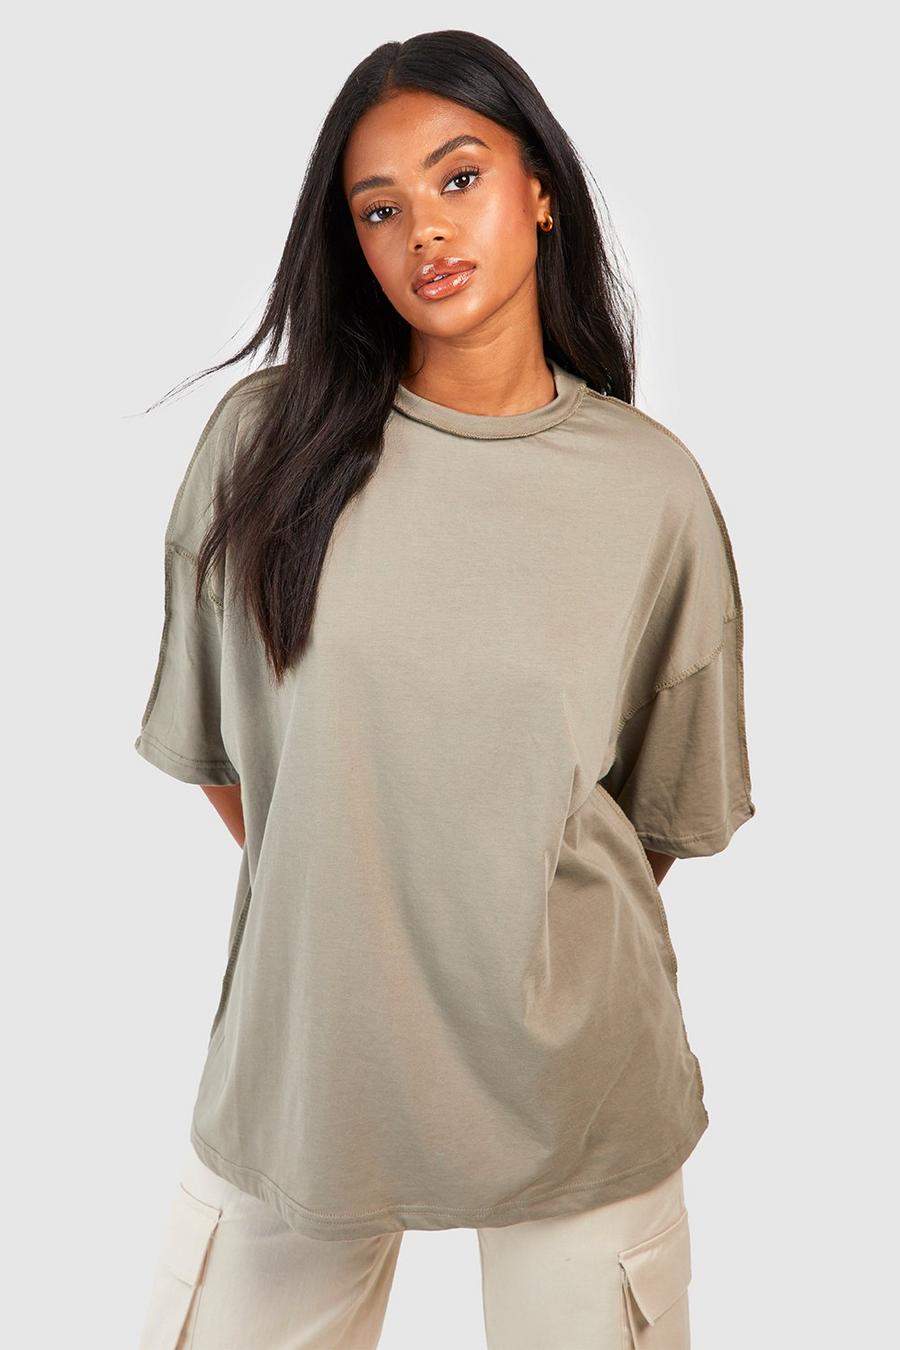 Khaki Exposed Seam Detail cupssized T-shirt  image number 1